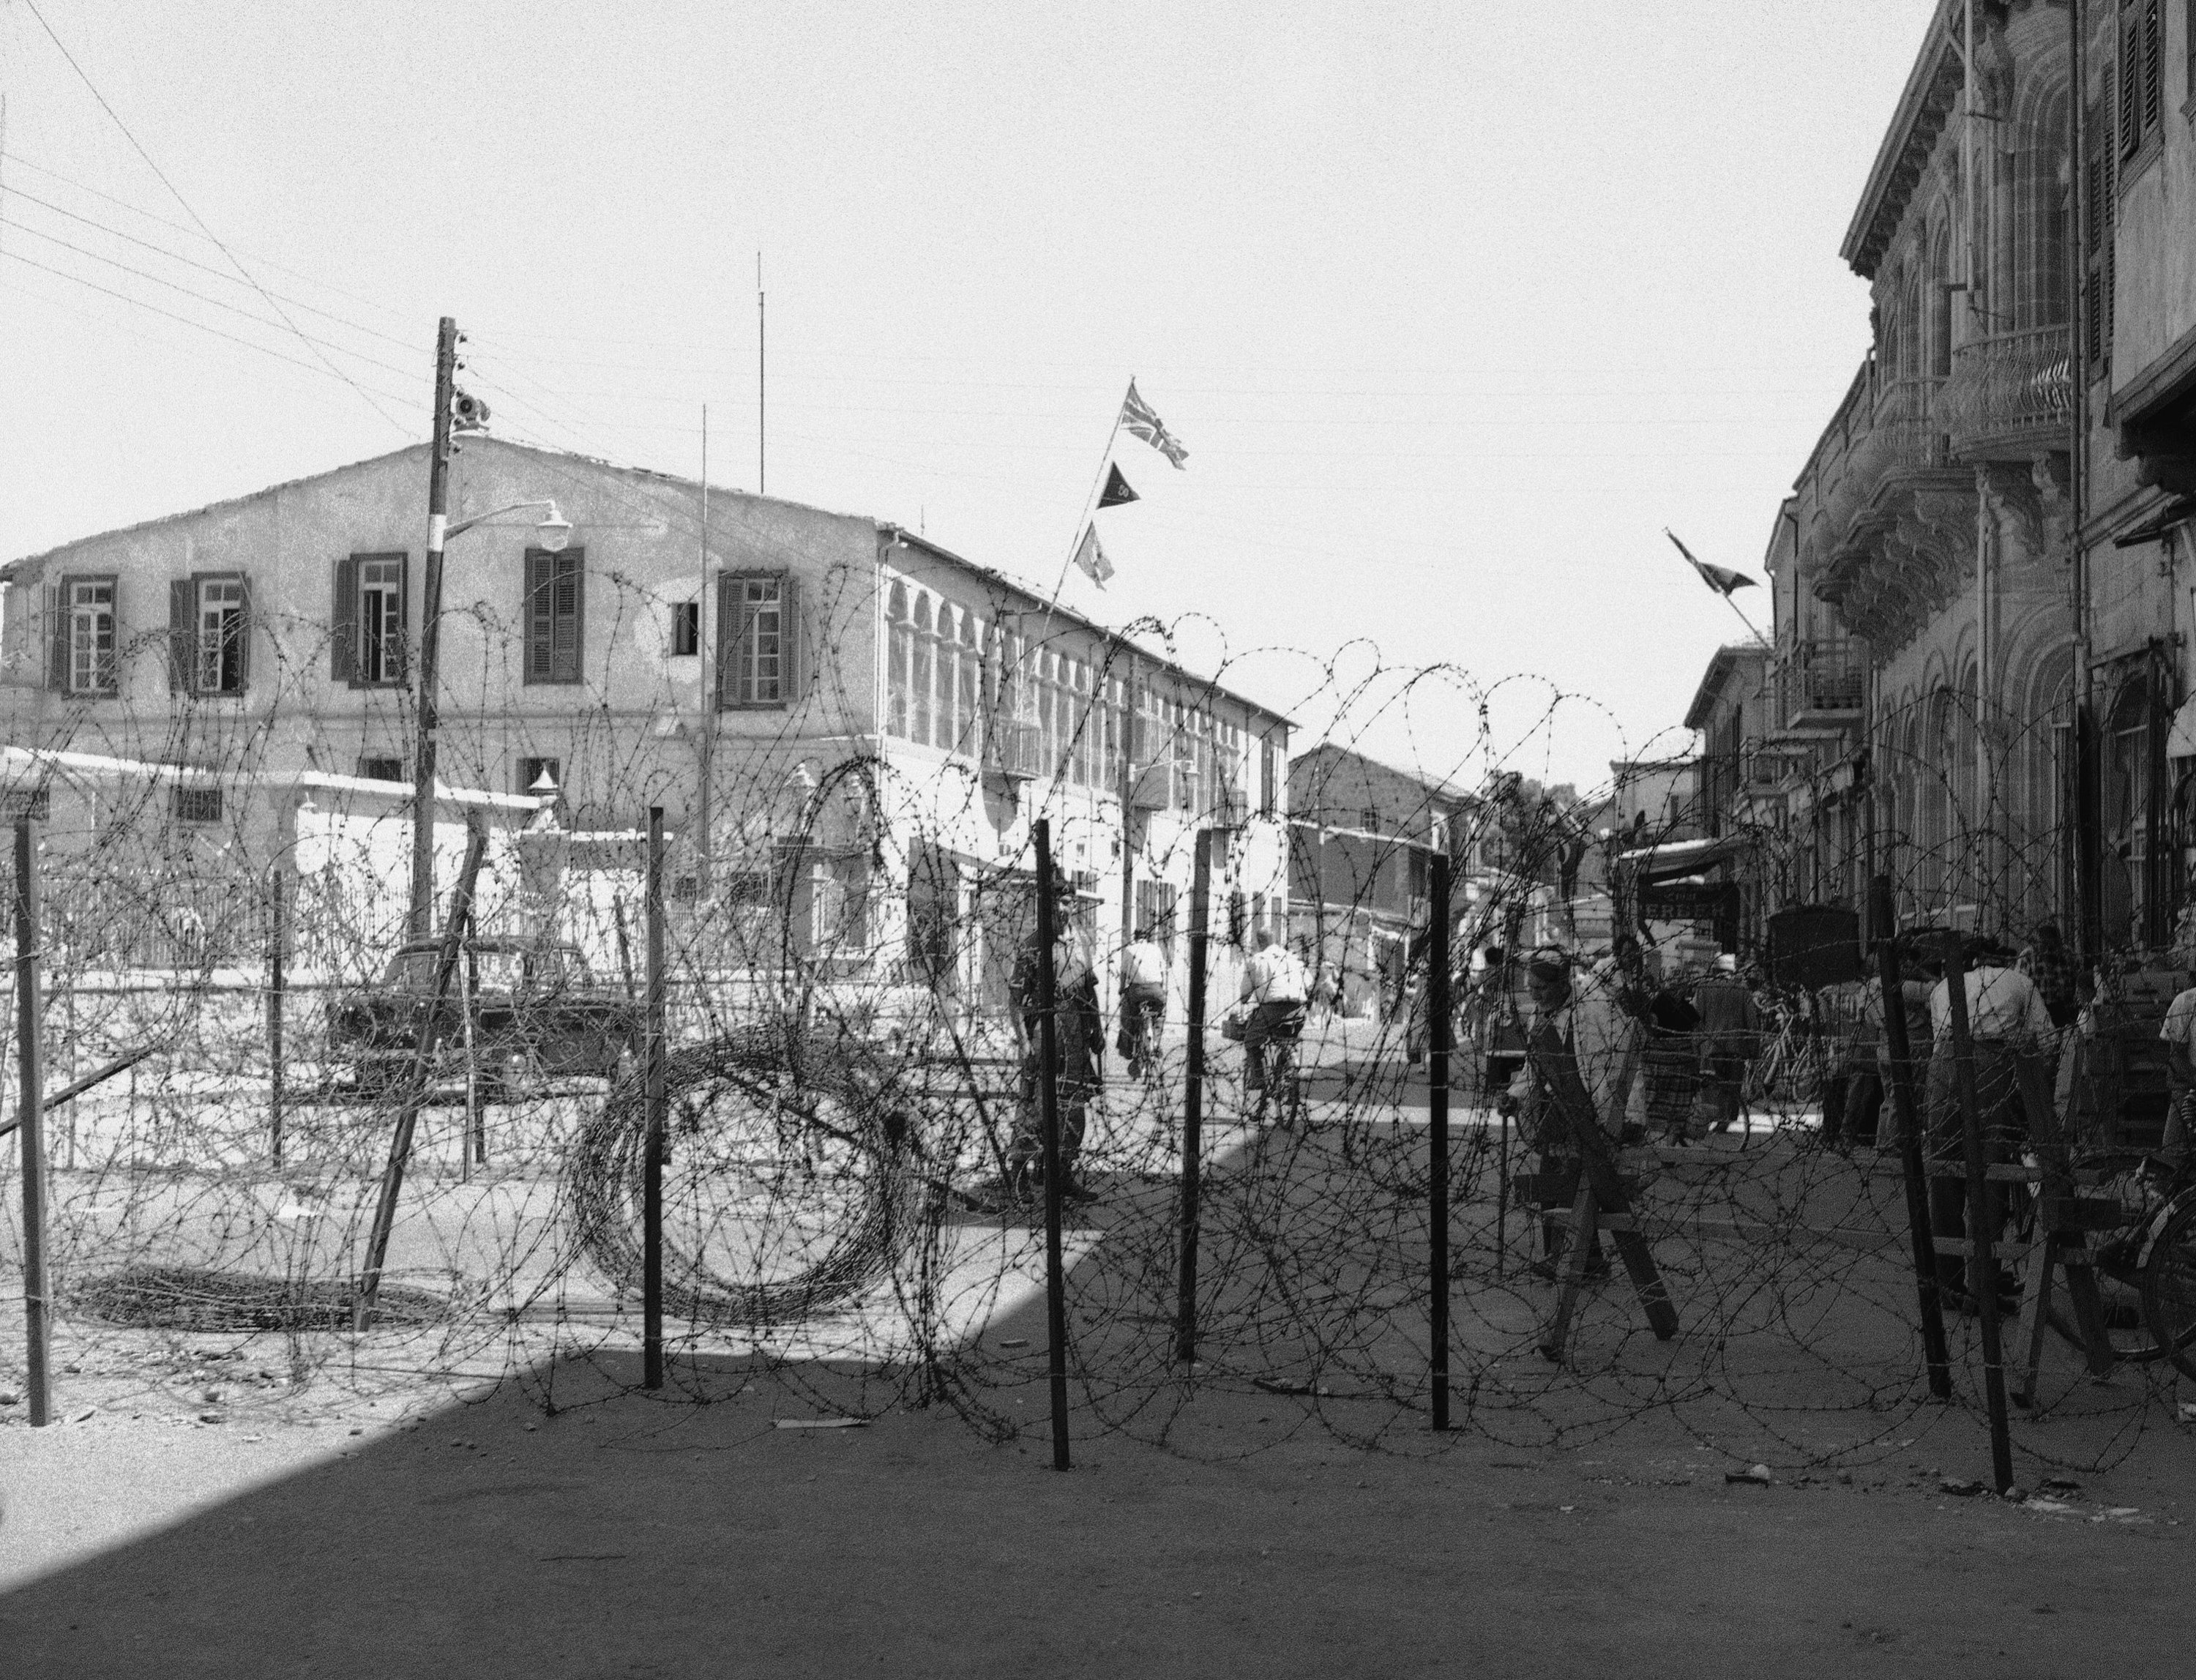 A barricade of barbed wire divides the Greek and Turkish quarters of Nicosia, Cyprus shown June 30, 1958. The Greek section is in the foreground. A British soldier (center) stands on guard behind the wire barrier. (AP Photo)